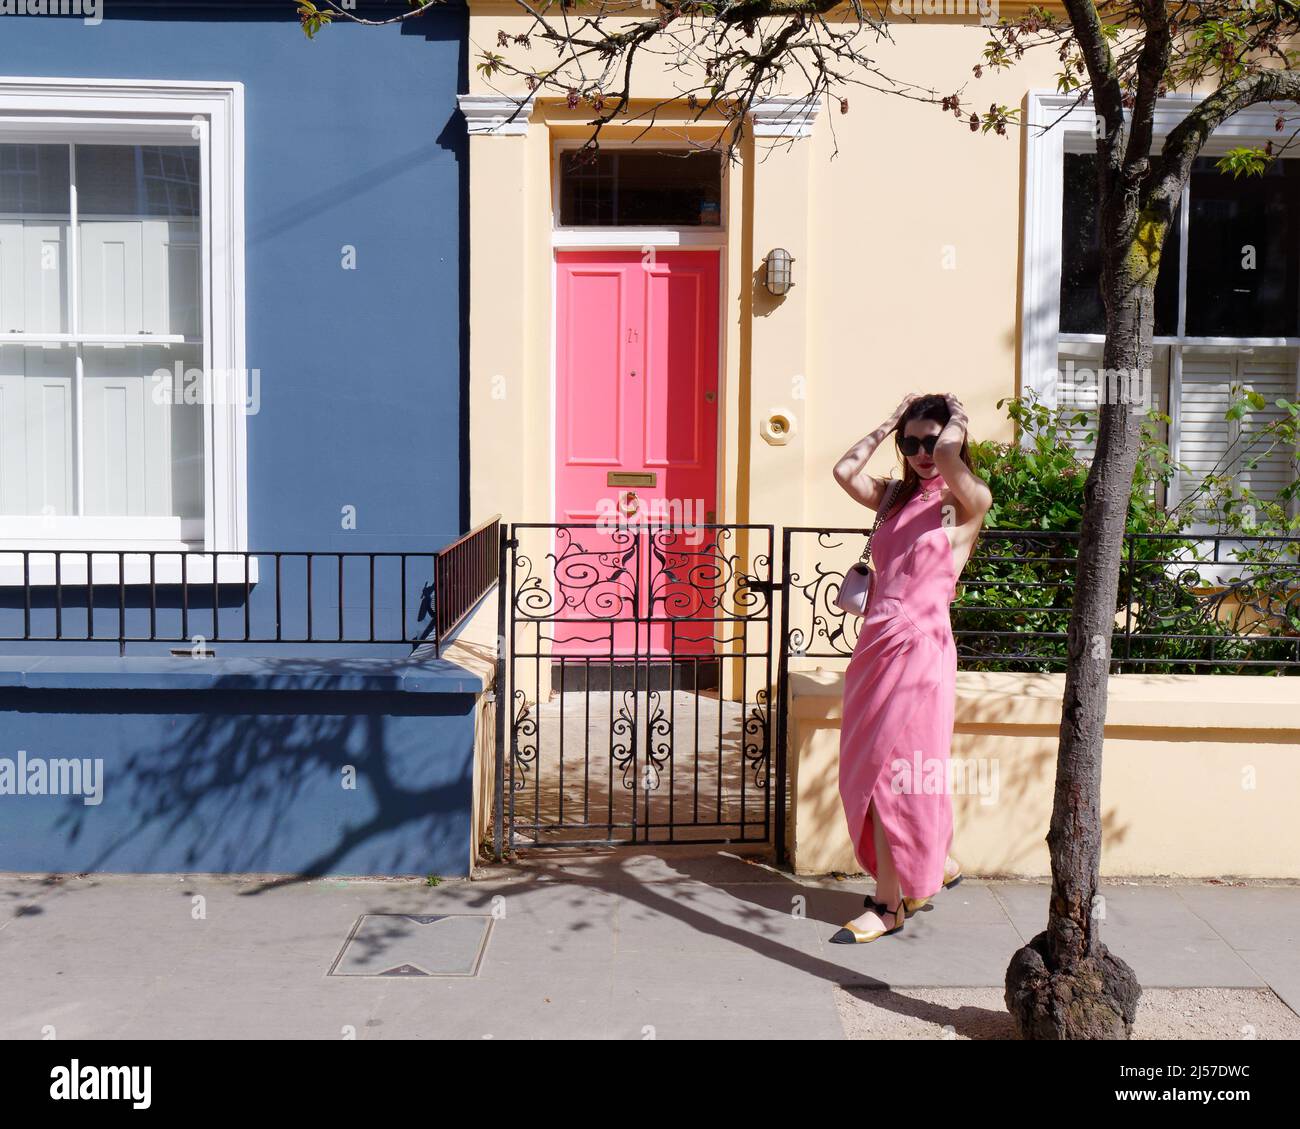 London, Greater London, England, April 09 2022: Woman in pink dress stands in front of a house with a pink door on Portabello Road in Notting Hill. Stock Photo